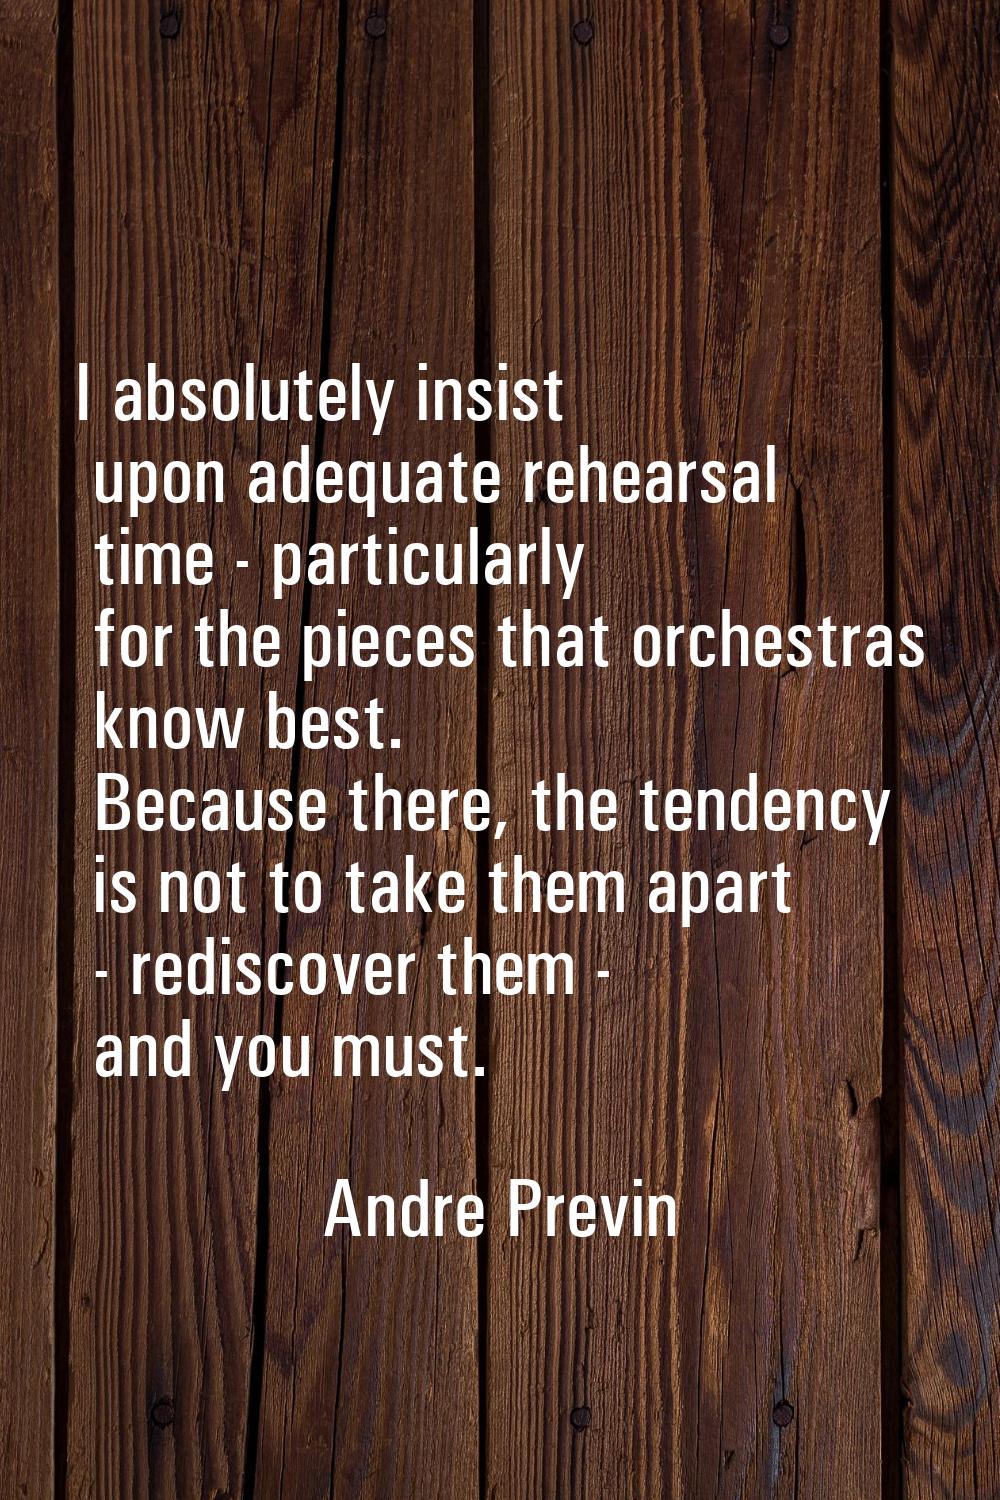 I absolutely insist upon adequate rehearsal time - particularly for the pieces that orchestras know